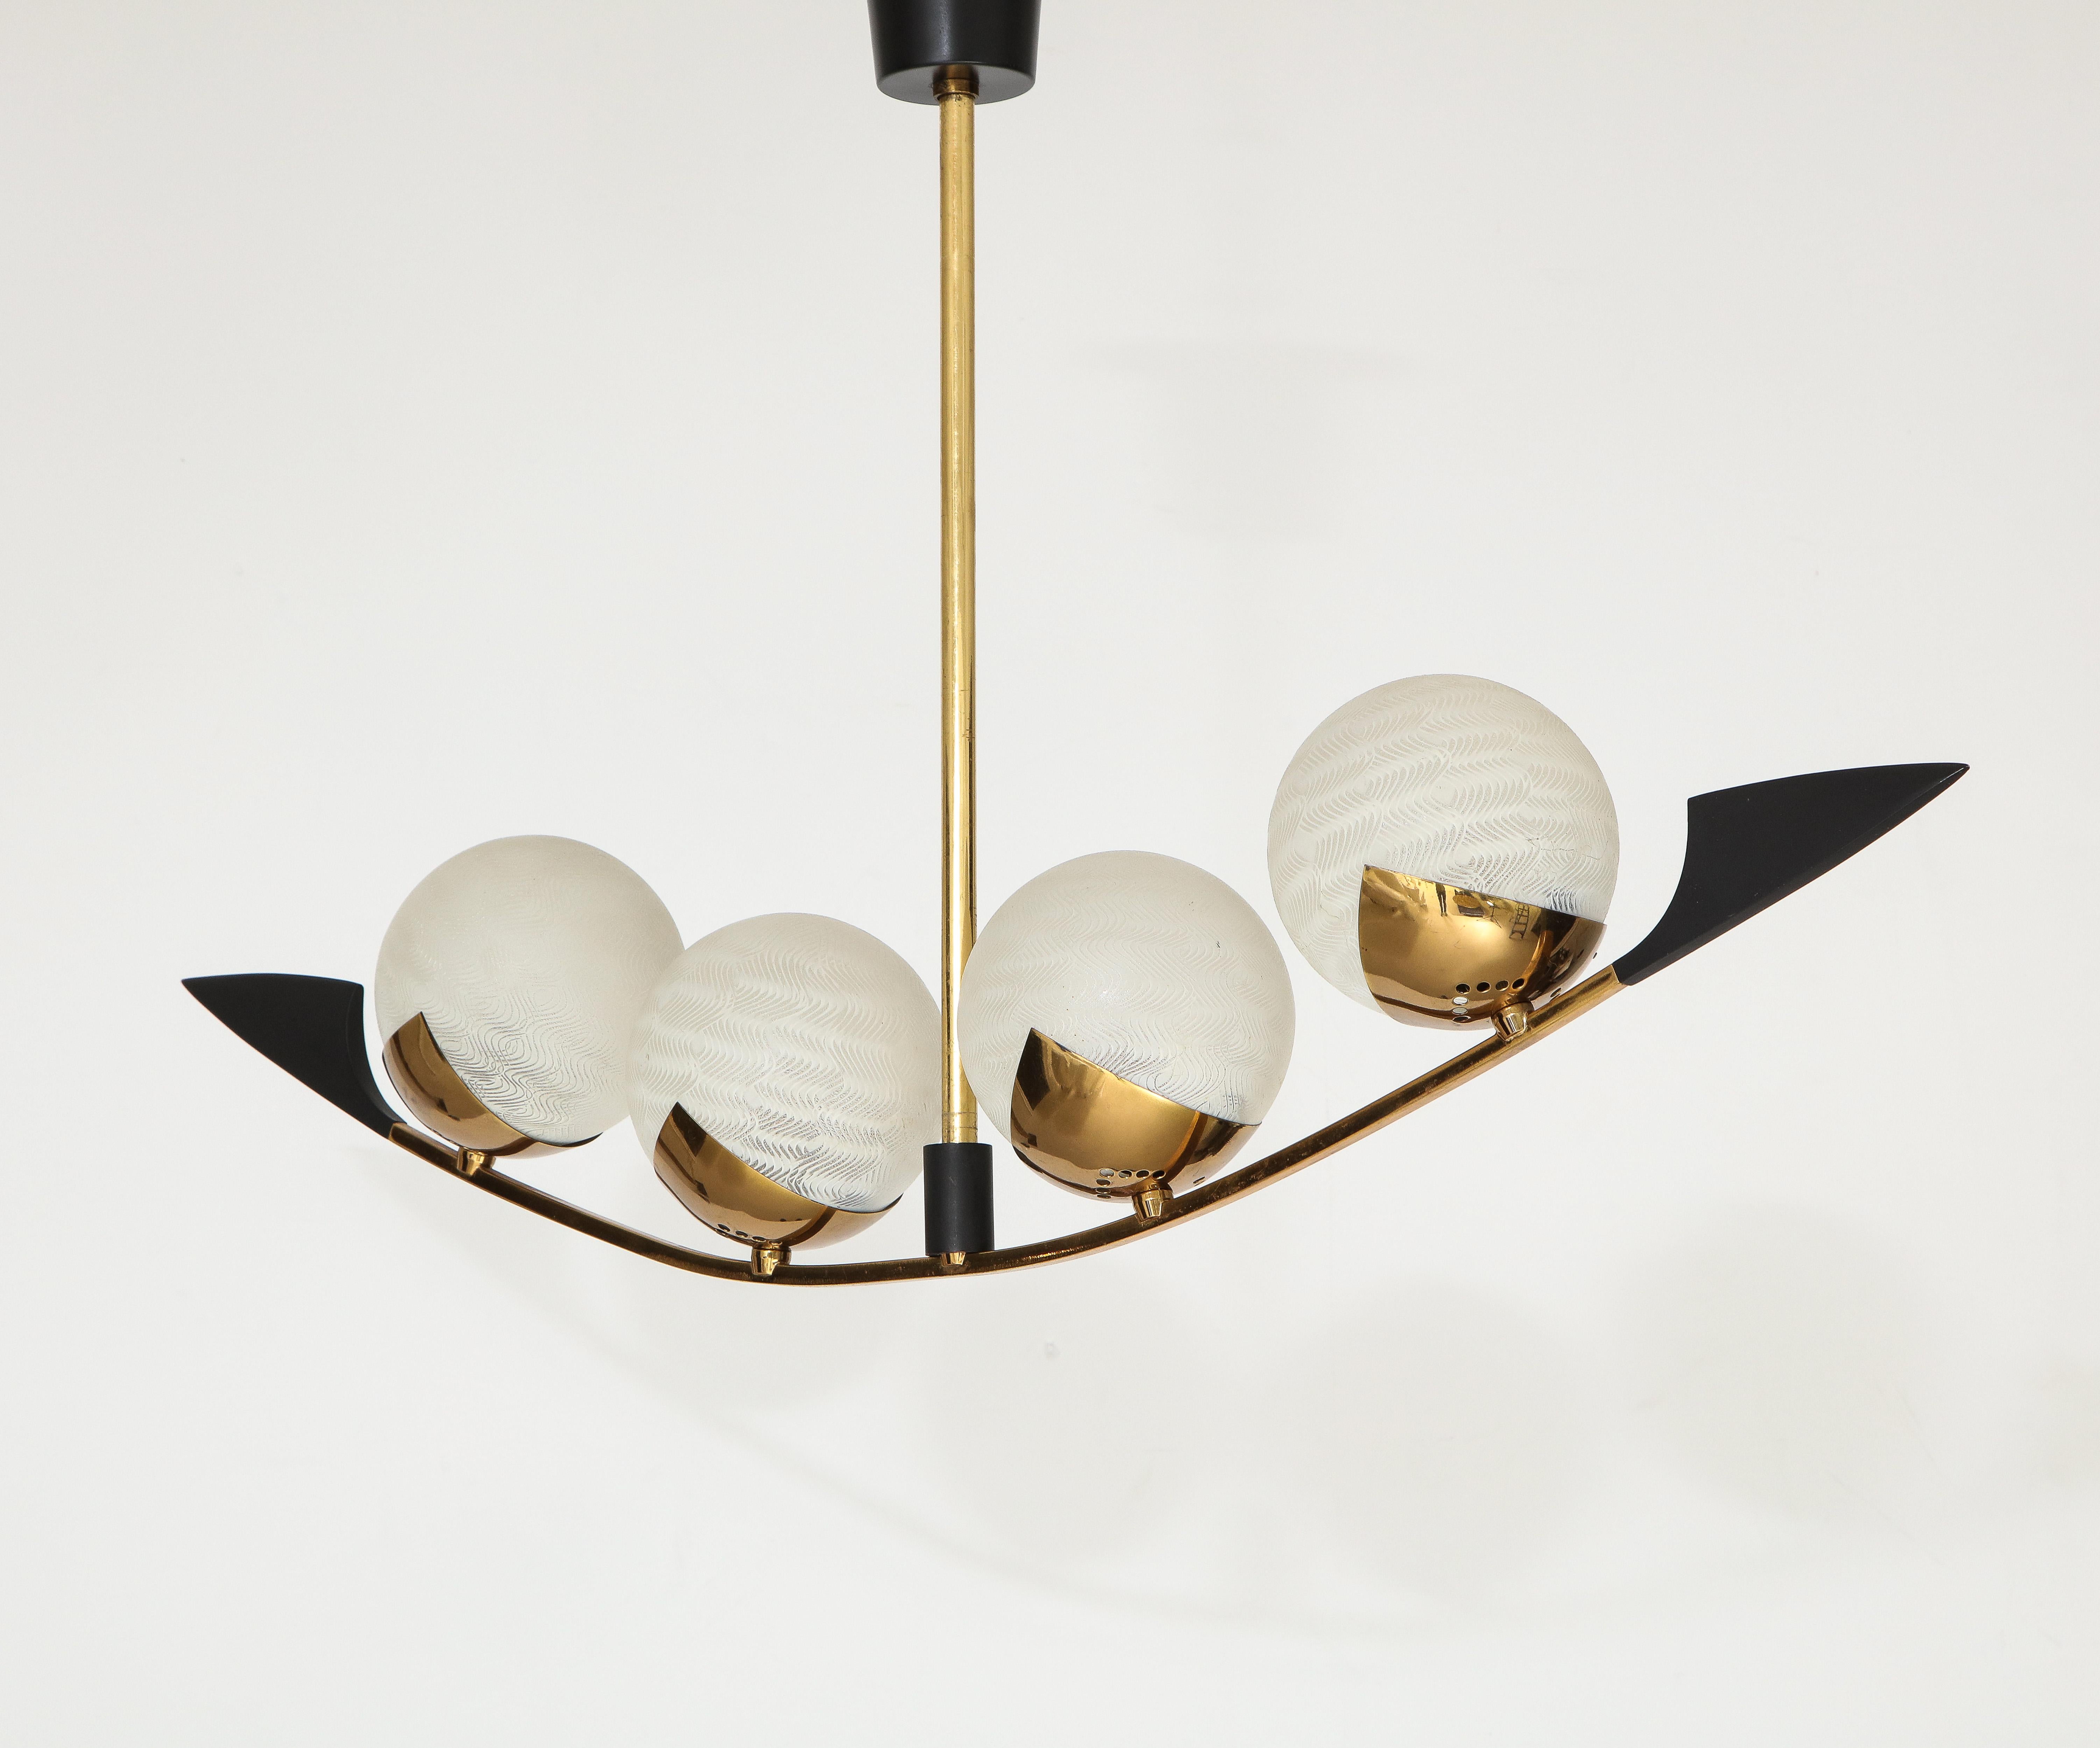 A wonderful French 1960s mid century 4 light chandelier done in polished brass and black enamel with decorative frosted globes by Lunel. Rewired. 4 candelabra 60 watt sockets.